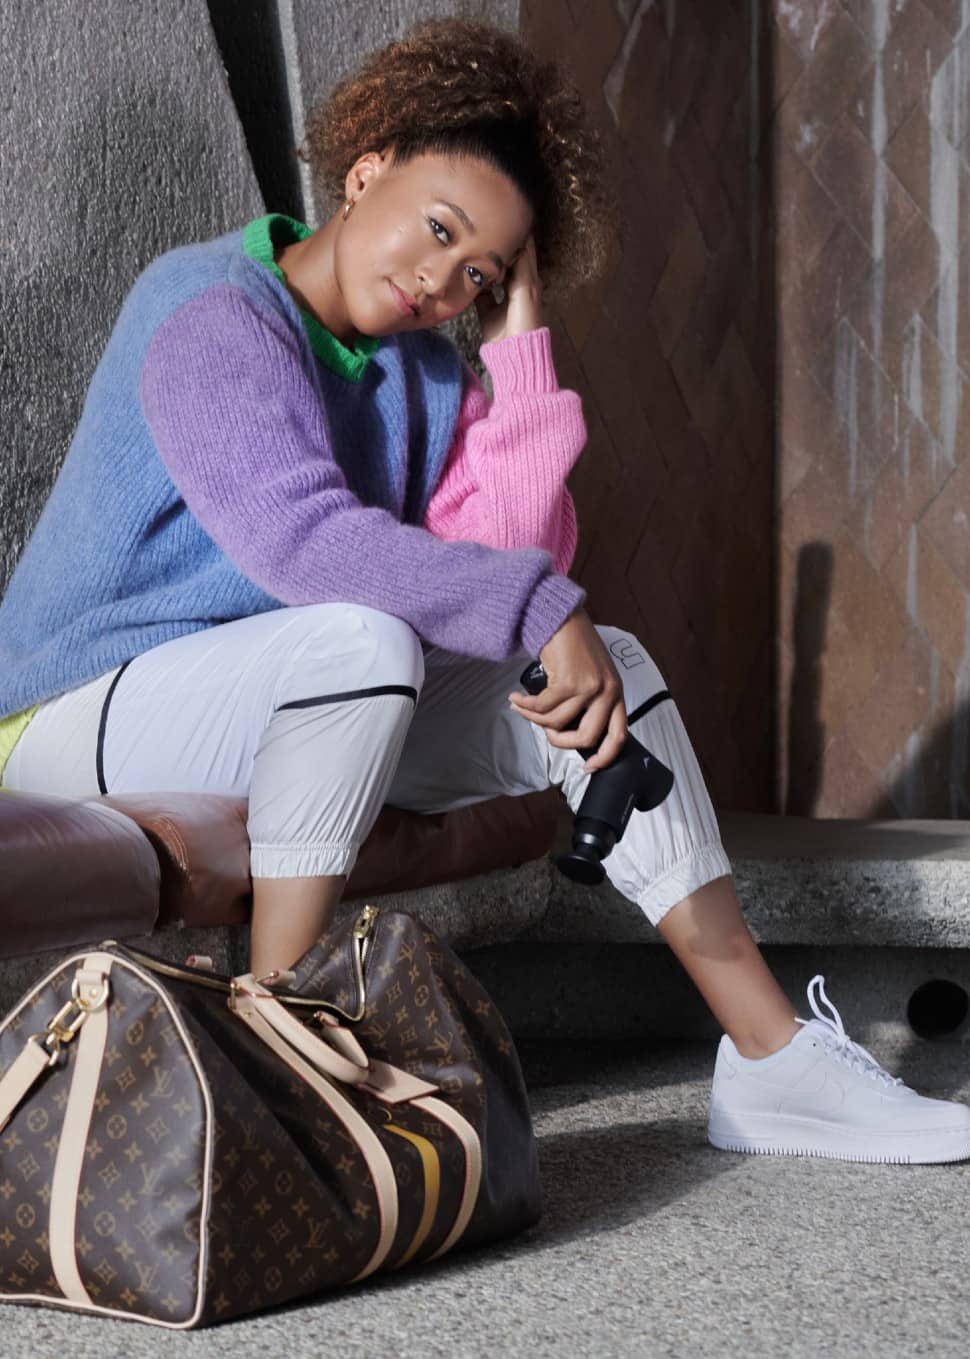 Naomi Osaka endorses several Japanese companies, including noodle maker Nissin Foods, cosmetics producer Shiseido, the broadcasting station Wowow, and airline All Nippon Airways (ANA). (Source: Twitter)